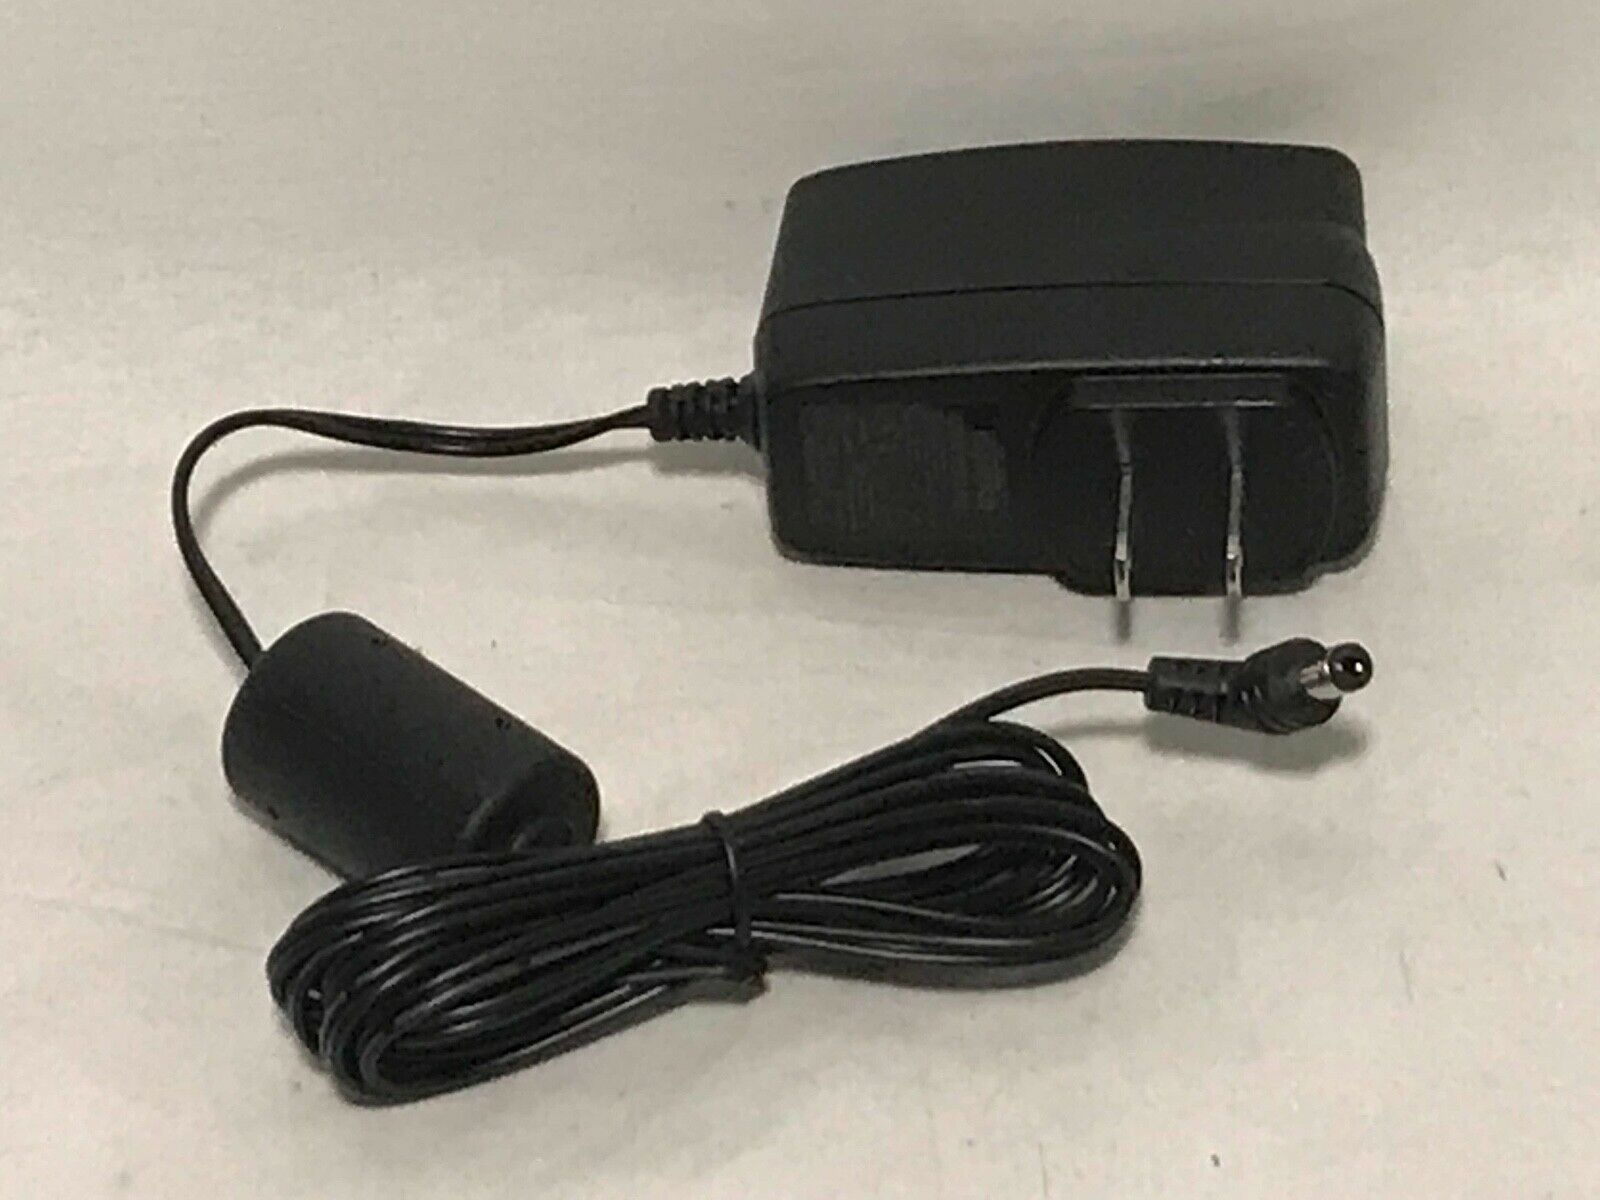 NEW Ingenico 8V 2A PSC16A-080L6 AC ADAPTER Power supply charger Specification: Brand: Ingenico Model: PSC16